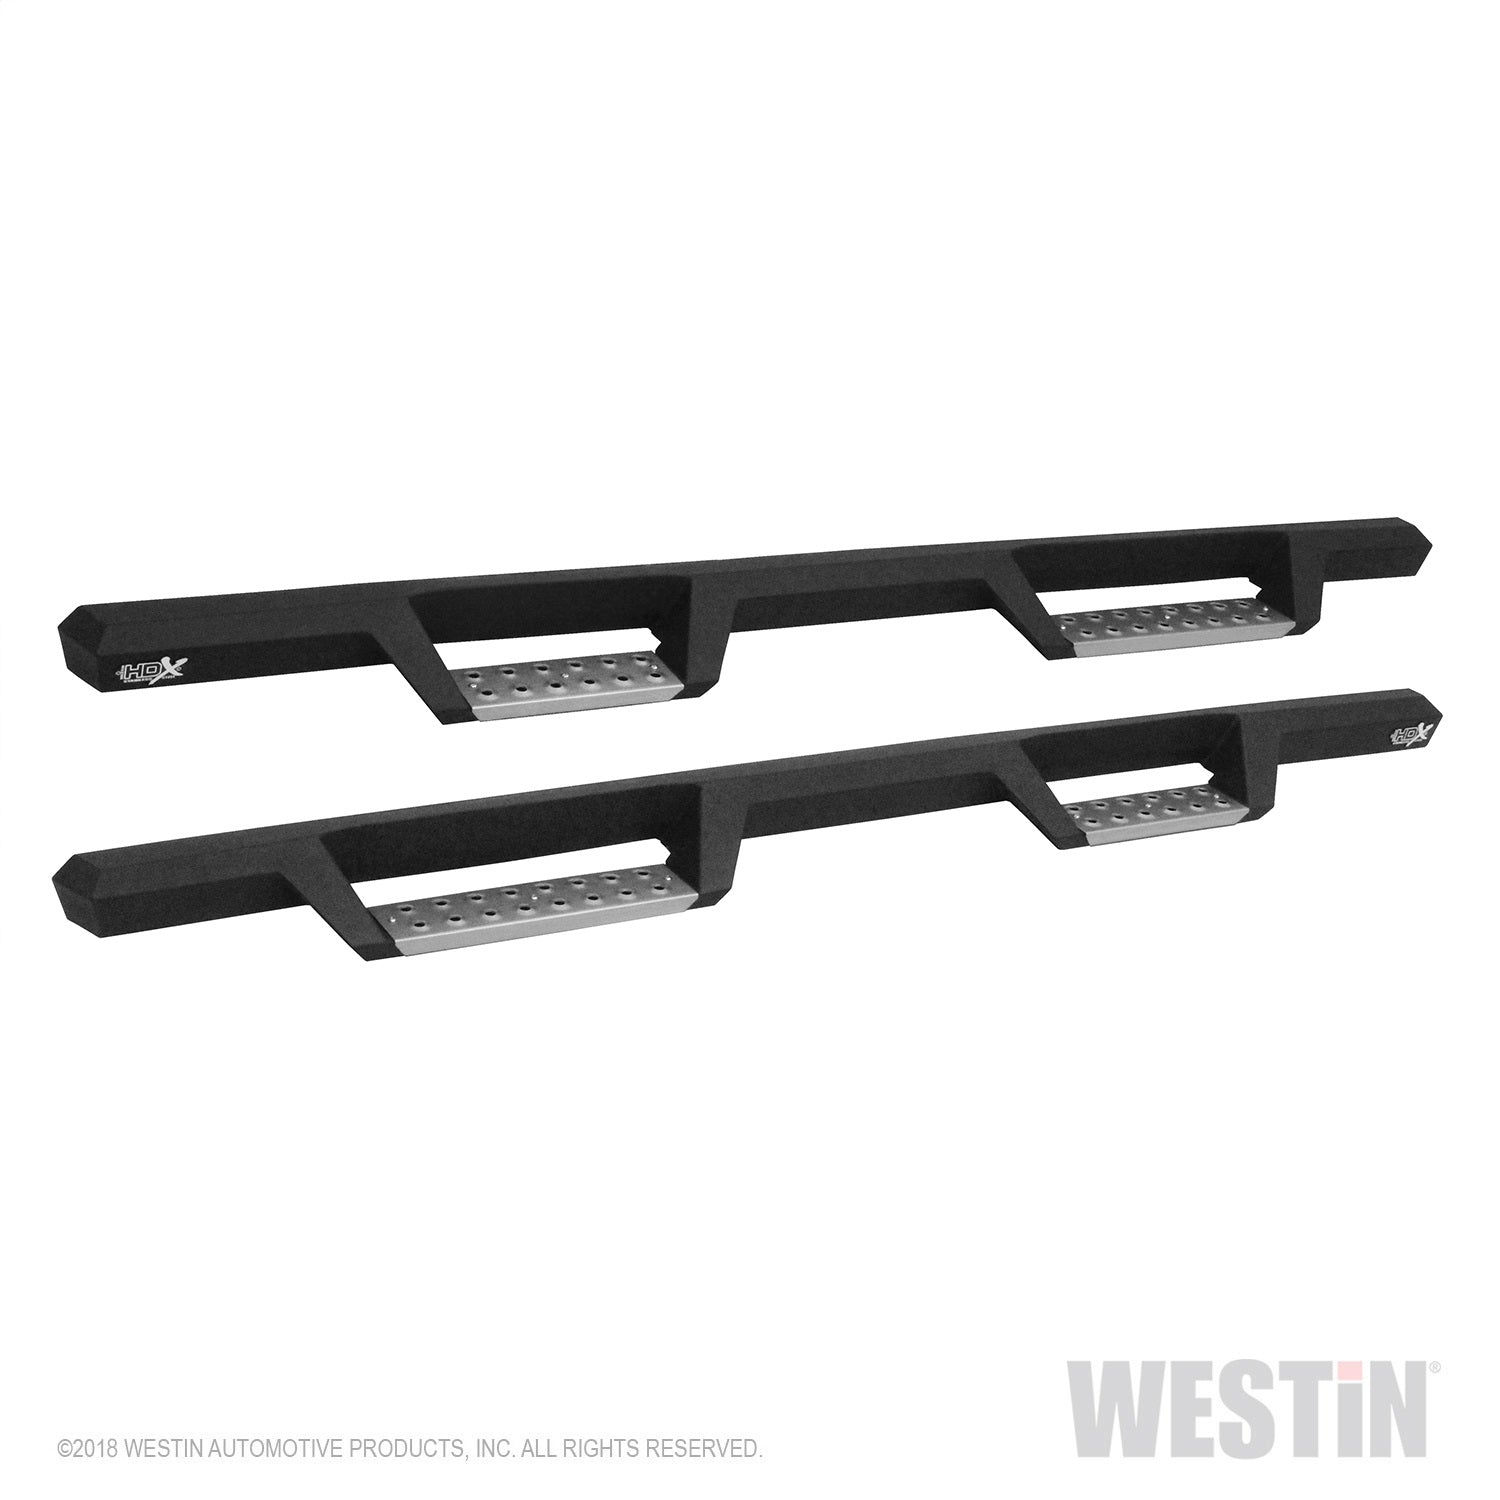 Westin 56-139352 HDX Stainless Drop Nerf Step Bars